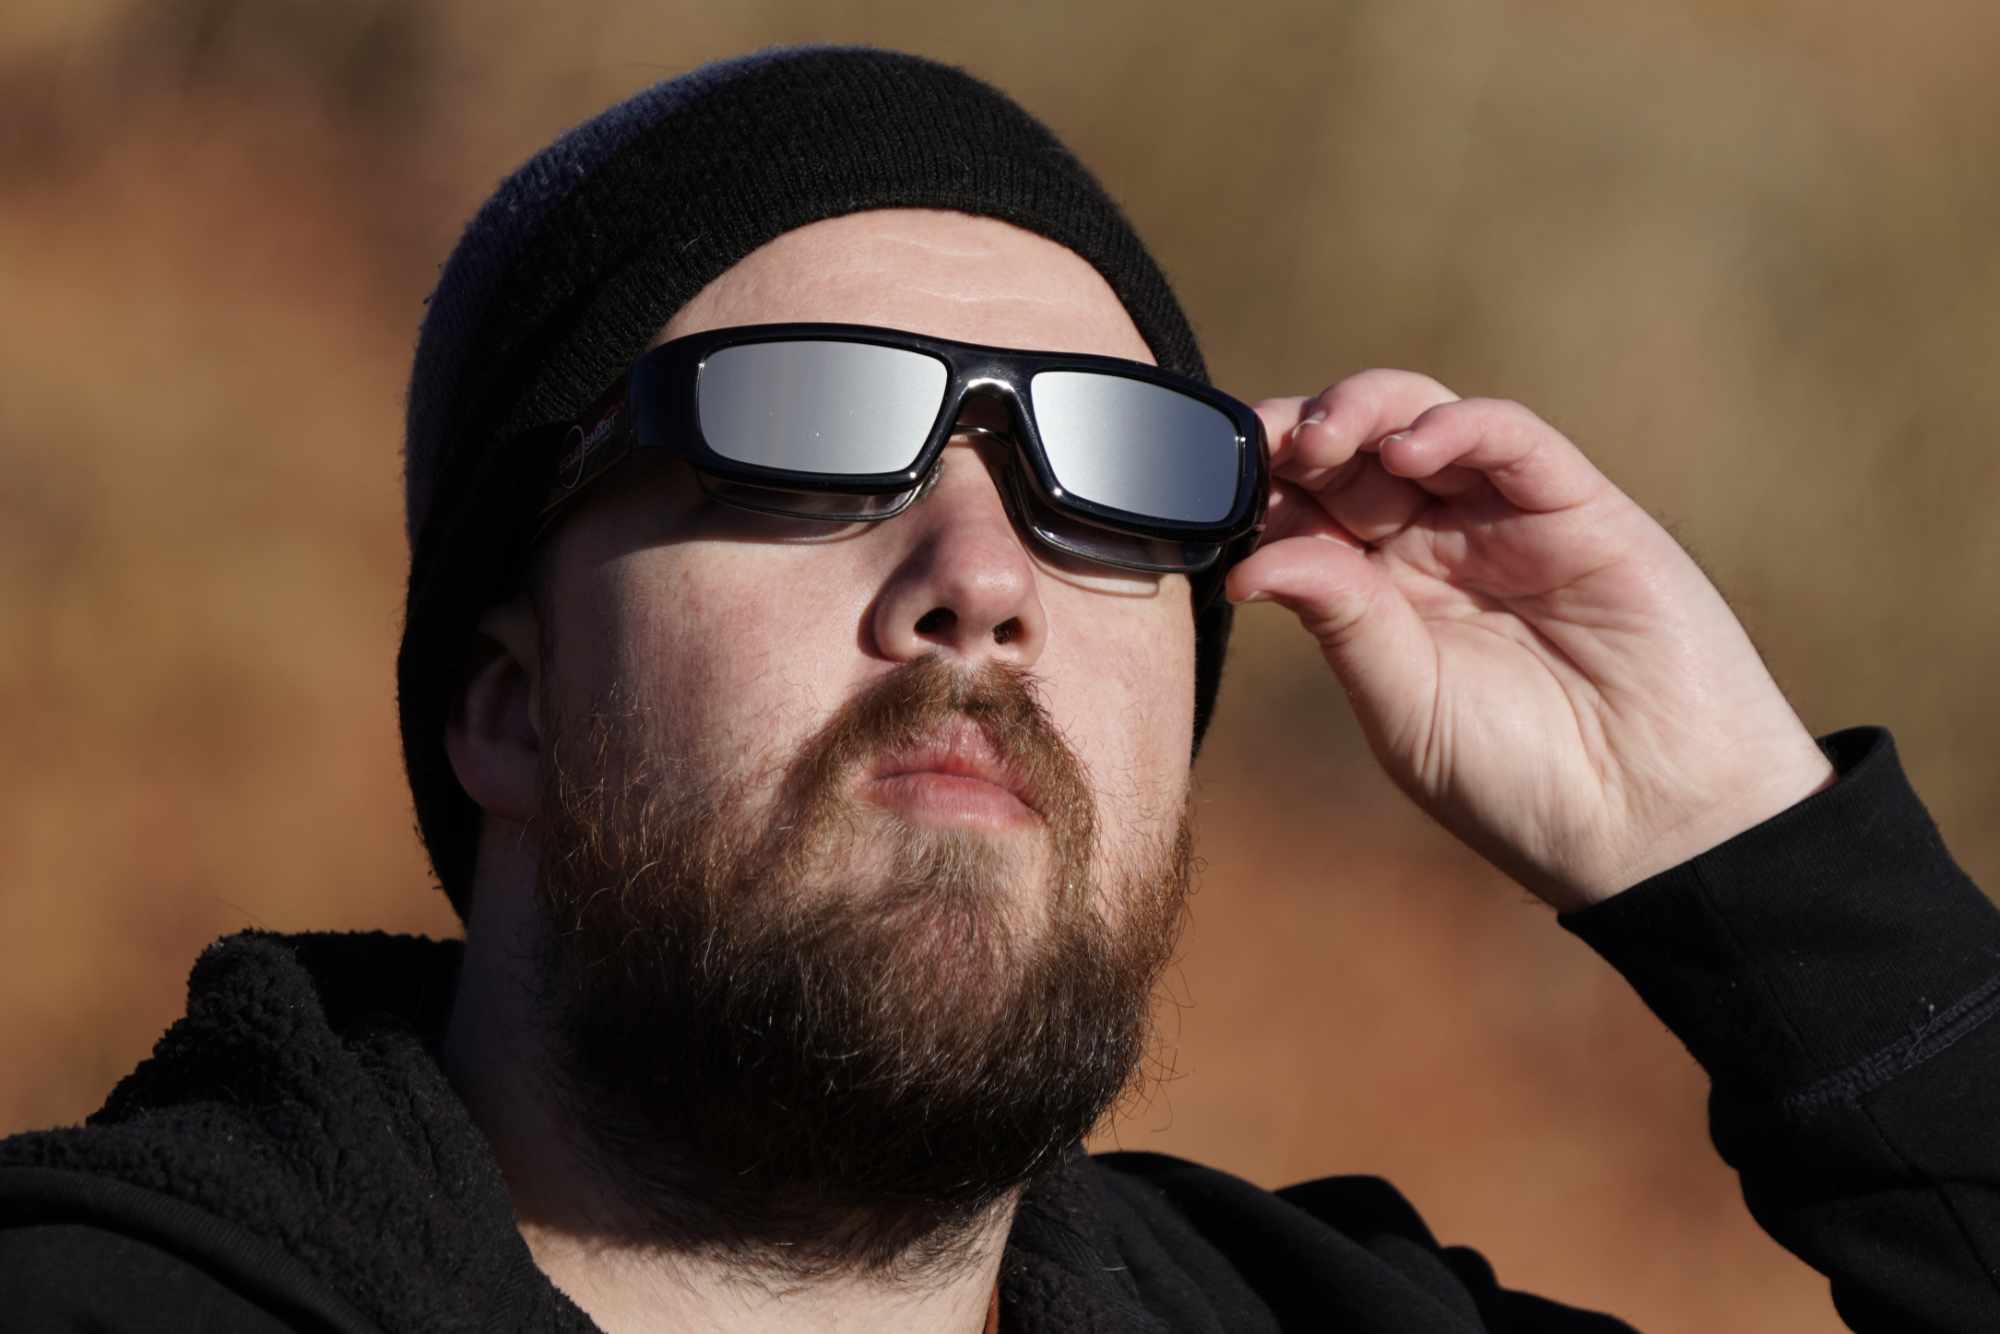 Black and silver eclipse glasses worn by a man with a beard and dark beanie hat